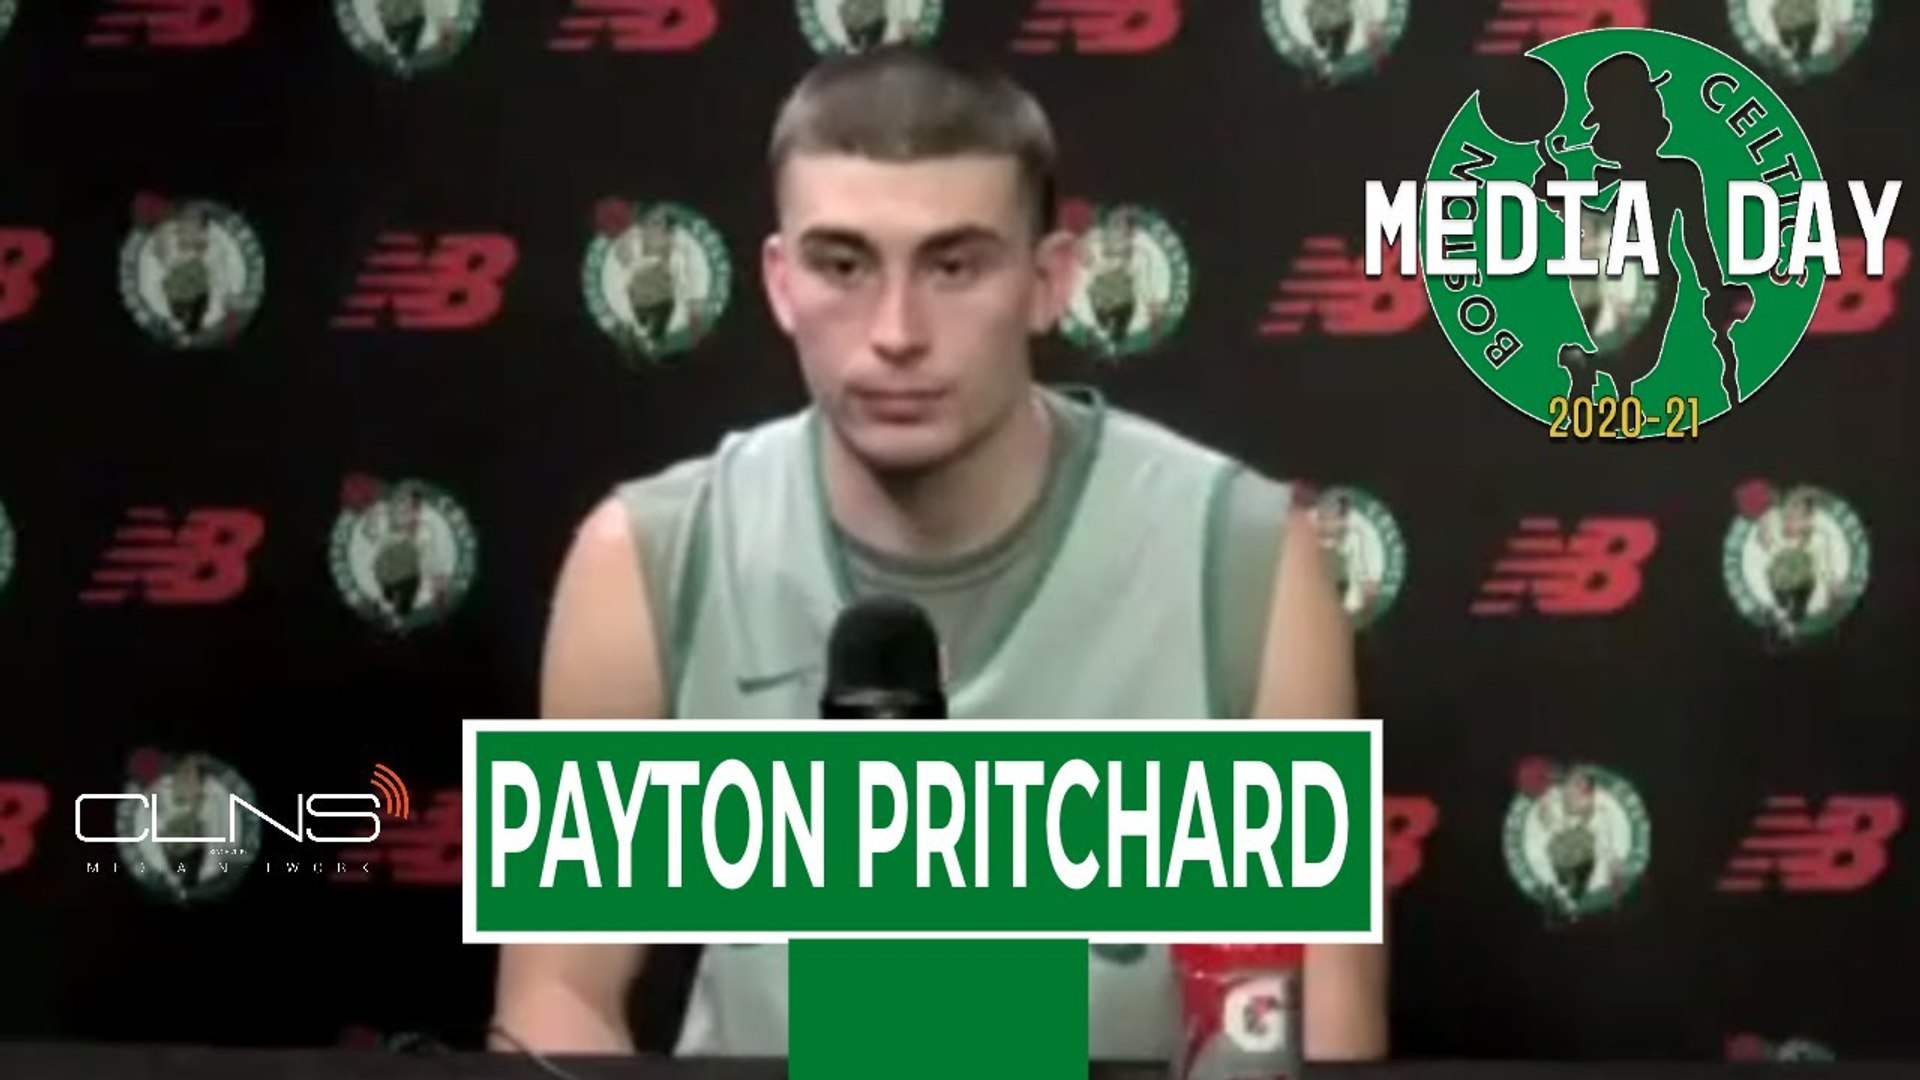 Who is Payton Pritchard? — The Daily Goat